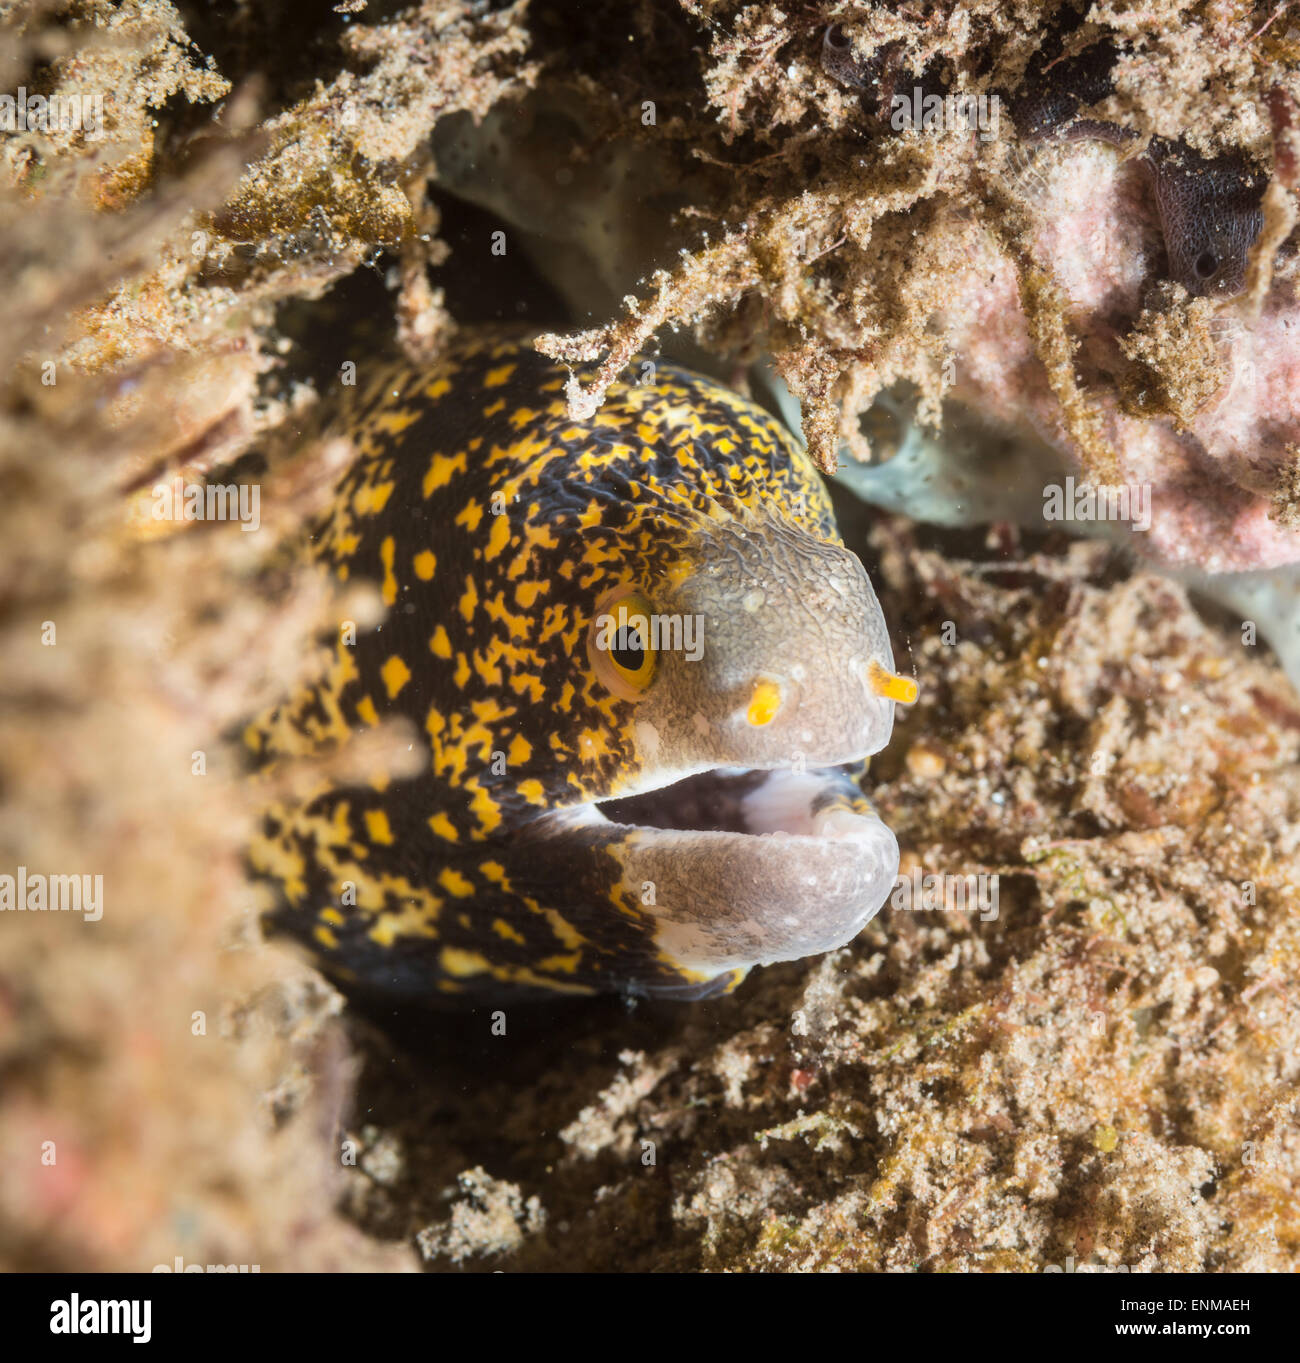 Snowflake moray eel peeking out from a hole in the corals Stock Photo